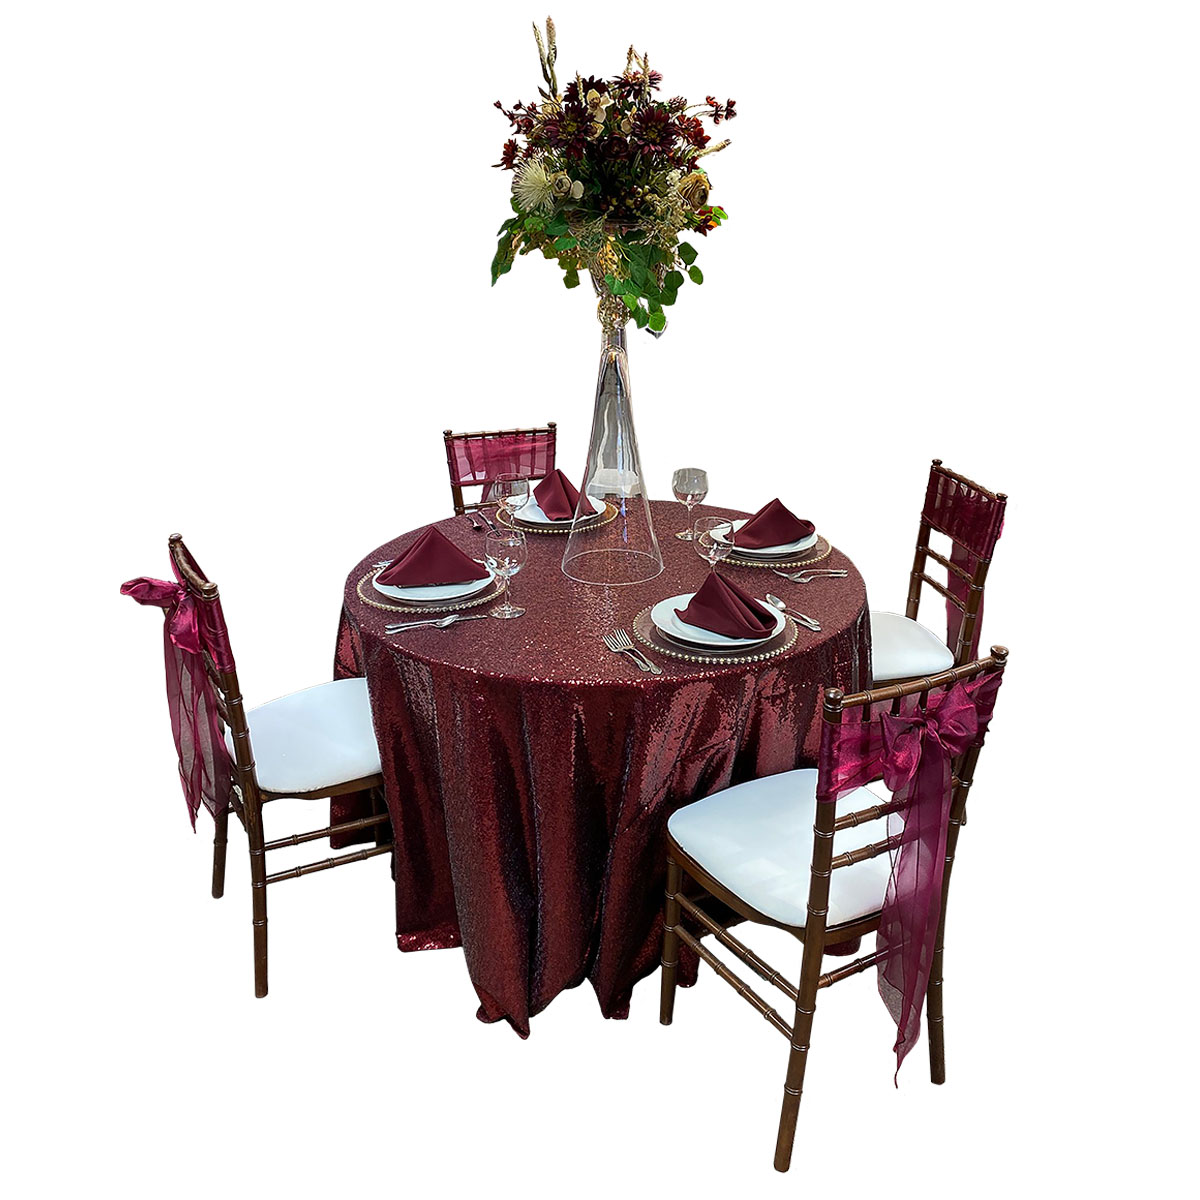 48" Round Table With 108" Round Crimson Glimmer Tablecover, Fruitwood Chiavari Chairs With White Pads, Wine Organza Sashes, Glass Chargers With Gold Beads, White Swirl China, Balloon Wine Glasses, Merlot Solid Napkins And Clarinet Vase (Floral Not Included)